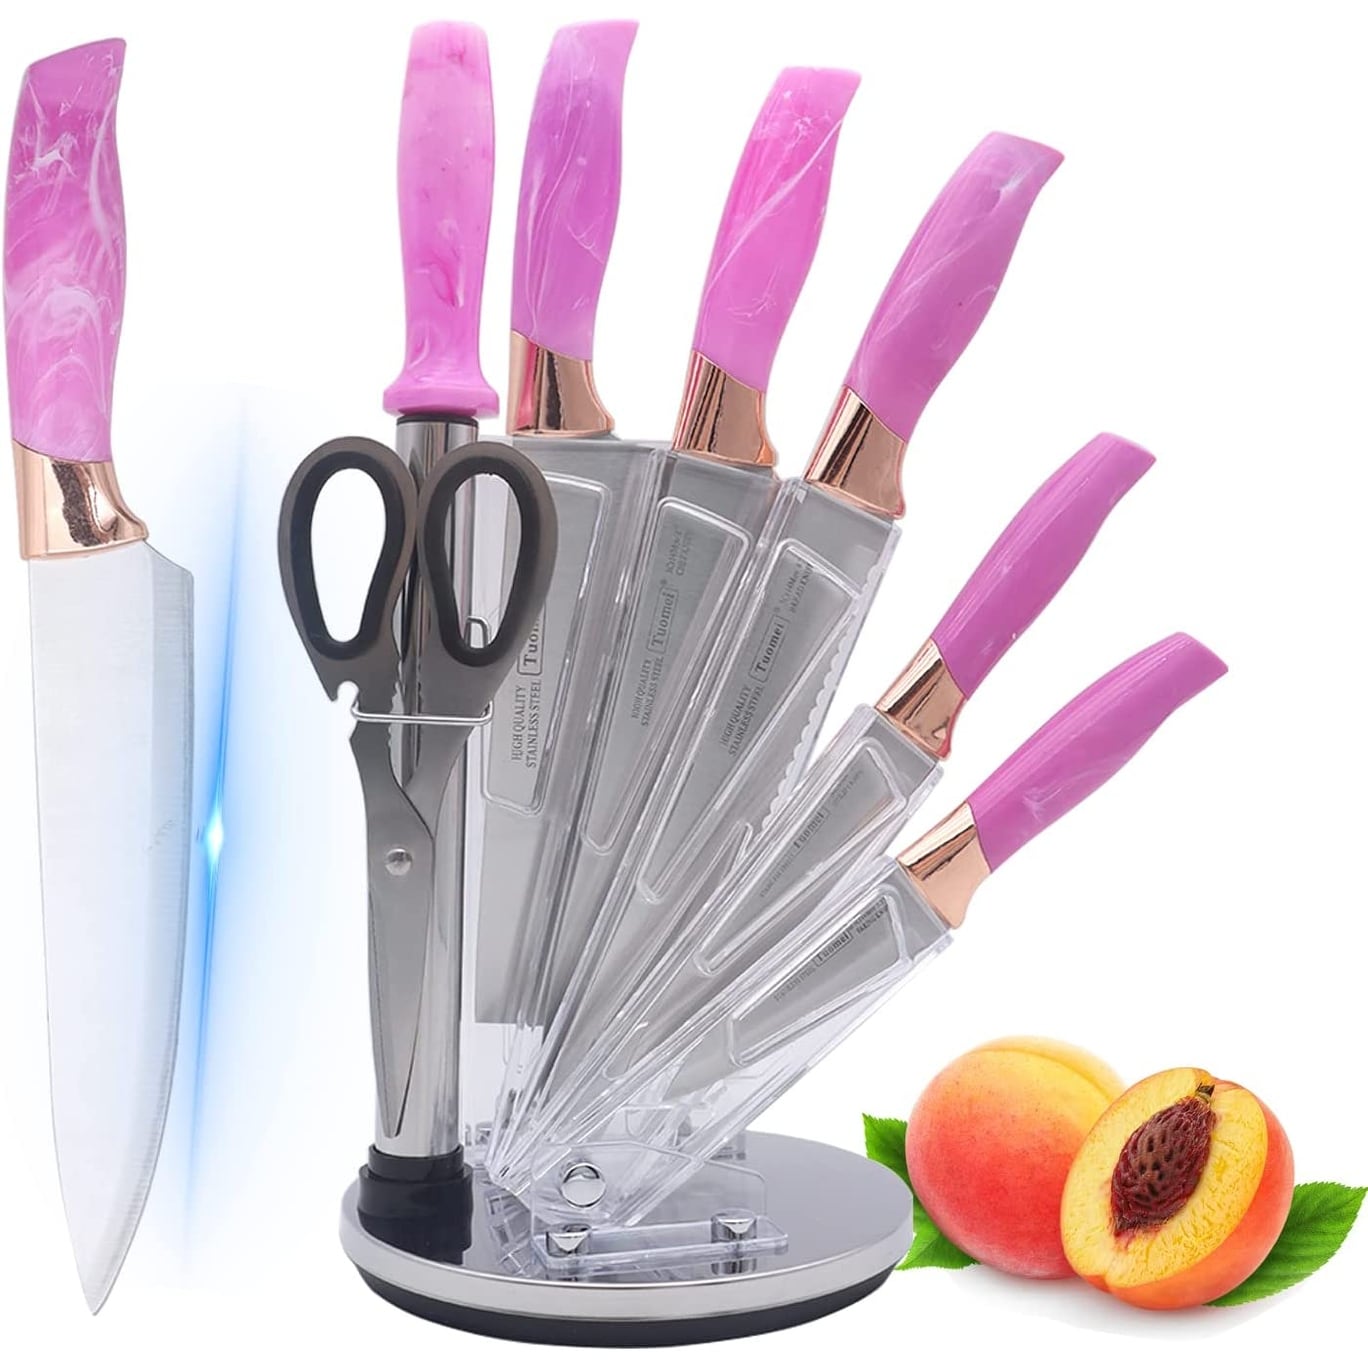 https://ak1.ostkcdn.com/images/products/is/images/direct/2a22bbccaa53d8a00b64e35403a8fc1ffcaf41c7/Kitchen-Knife-Set%2C-8-Pieces-Pink-Marbling-Handle-Knife-Set-for-Kitchen-with-Acrylic-Stand.jpg